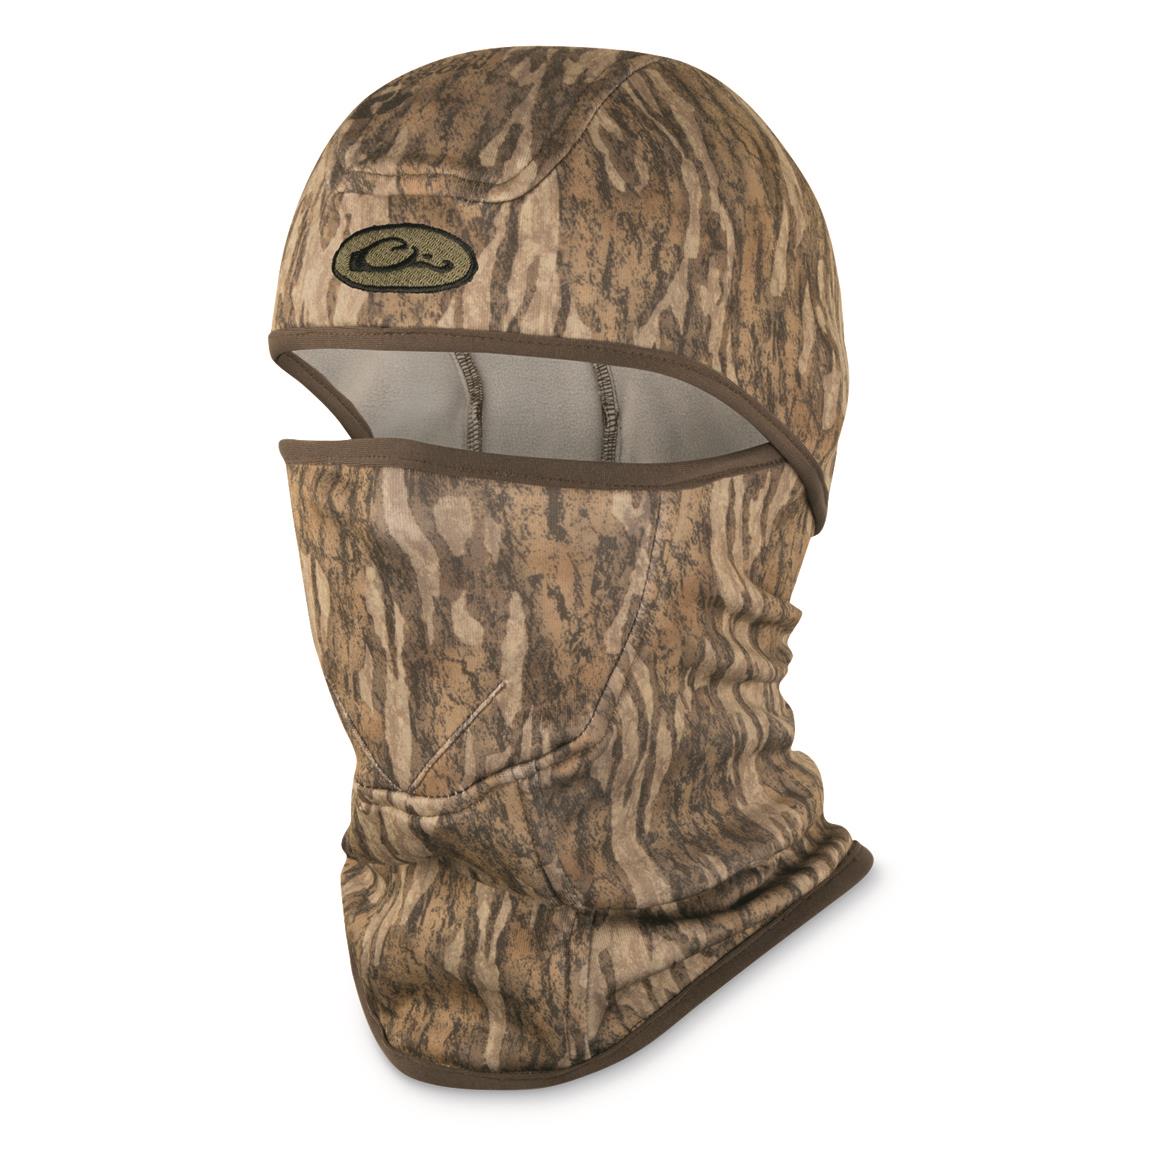 Outdoor Cap with Bug Net - 670715, Hats & Caps at Sportsman's Guide